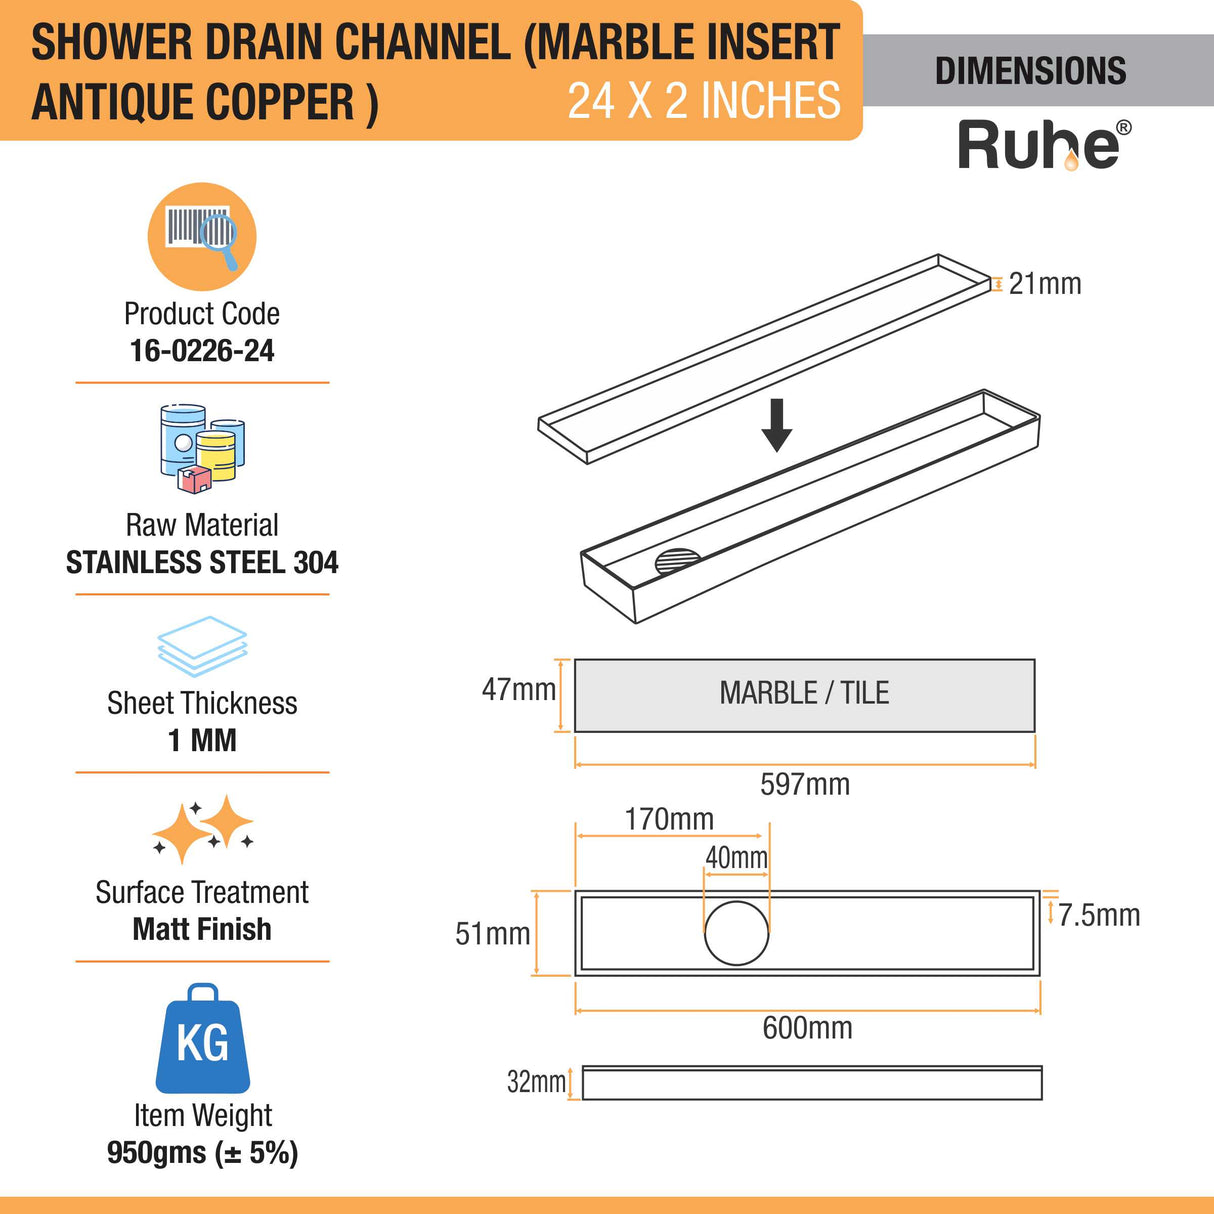 Marble Insert Shower Drain Channel (24 x 2 Inches) ANTIQUE COPPER dimensions and size